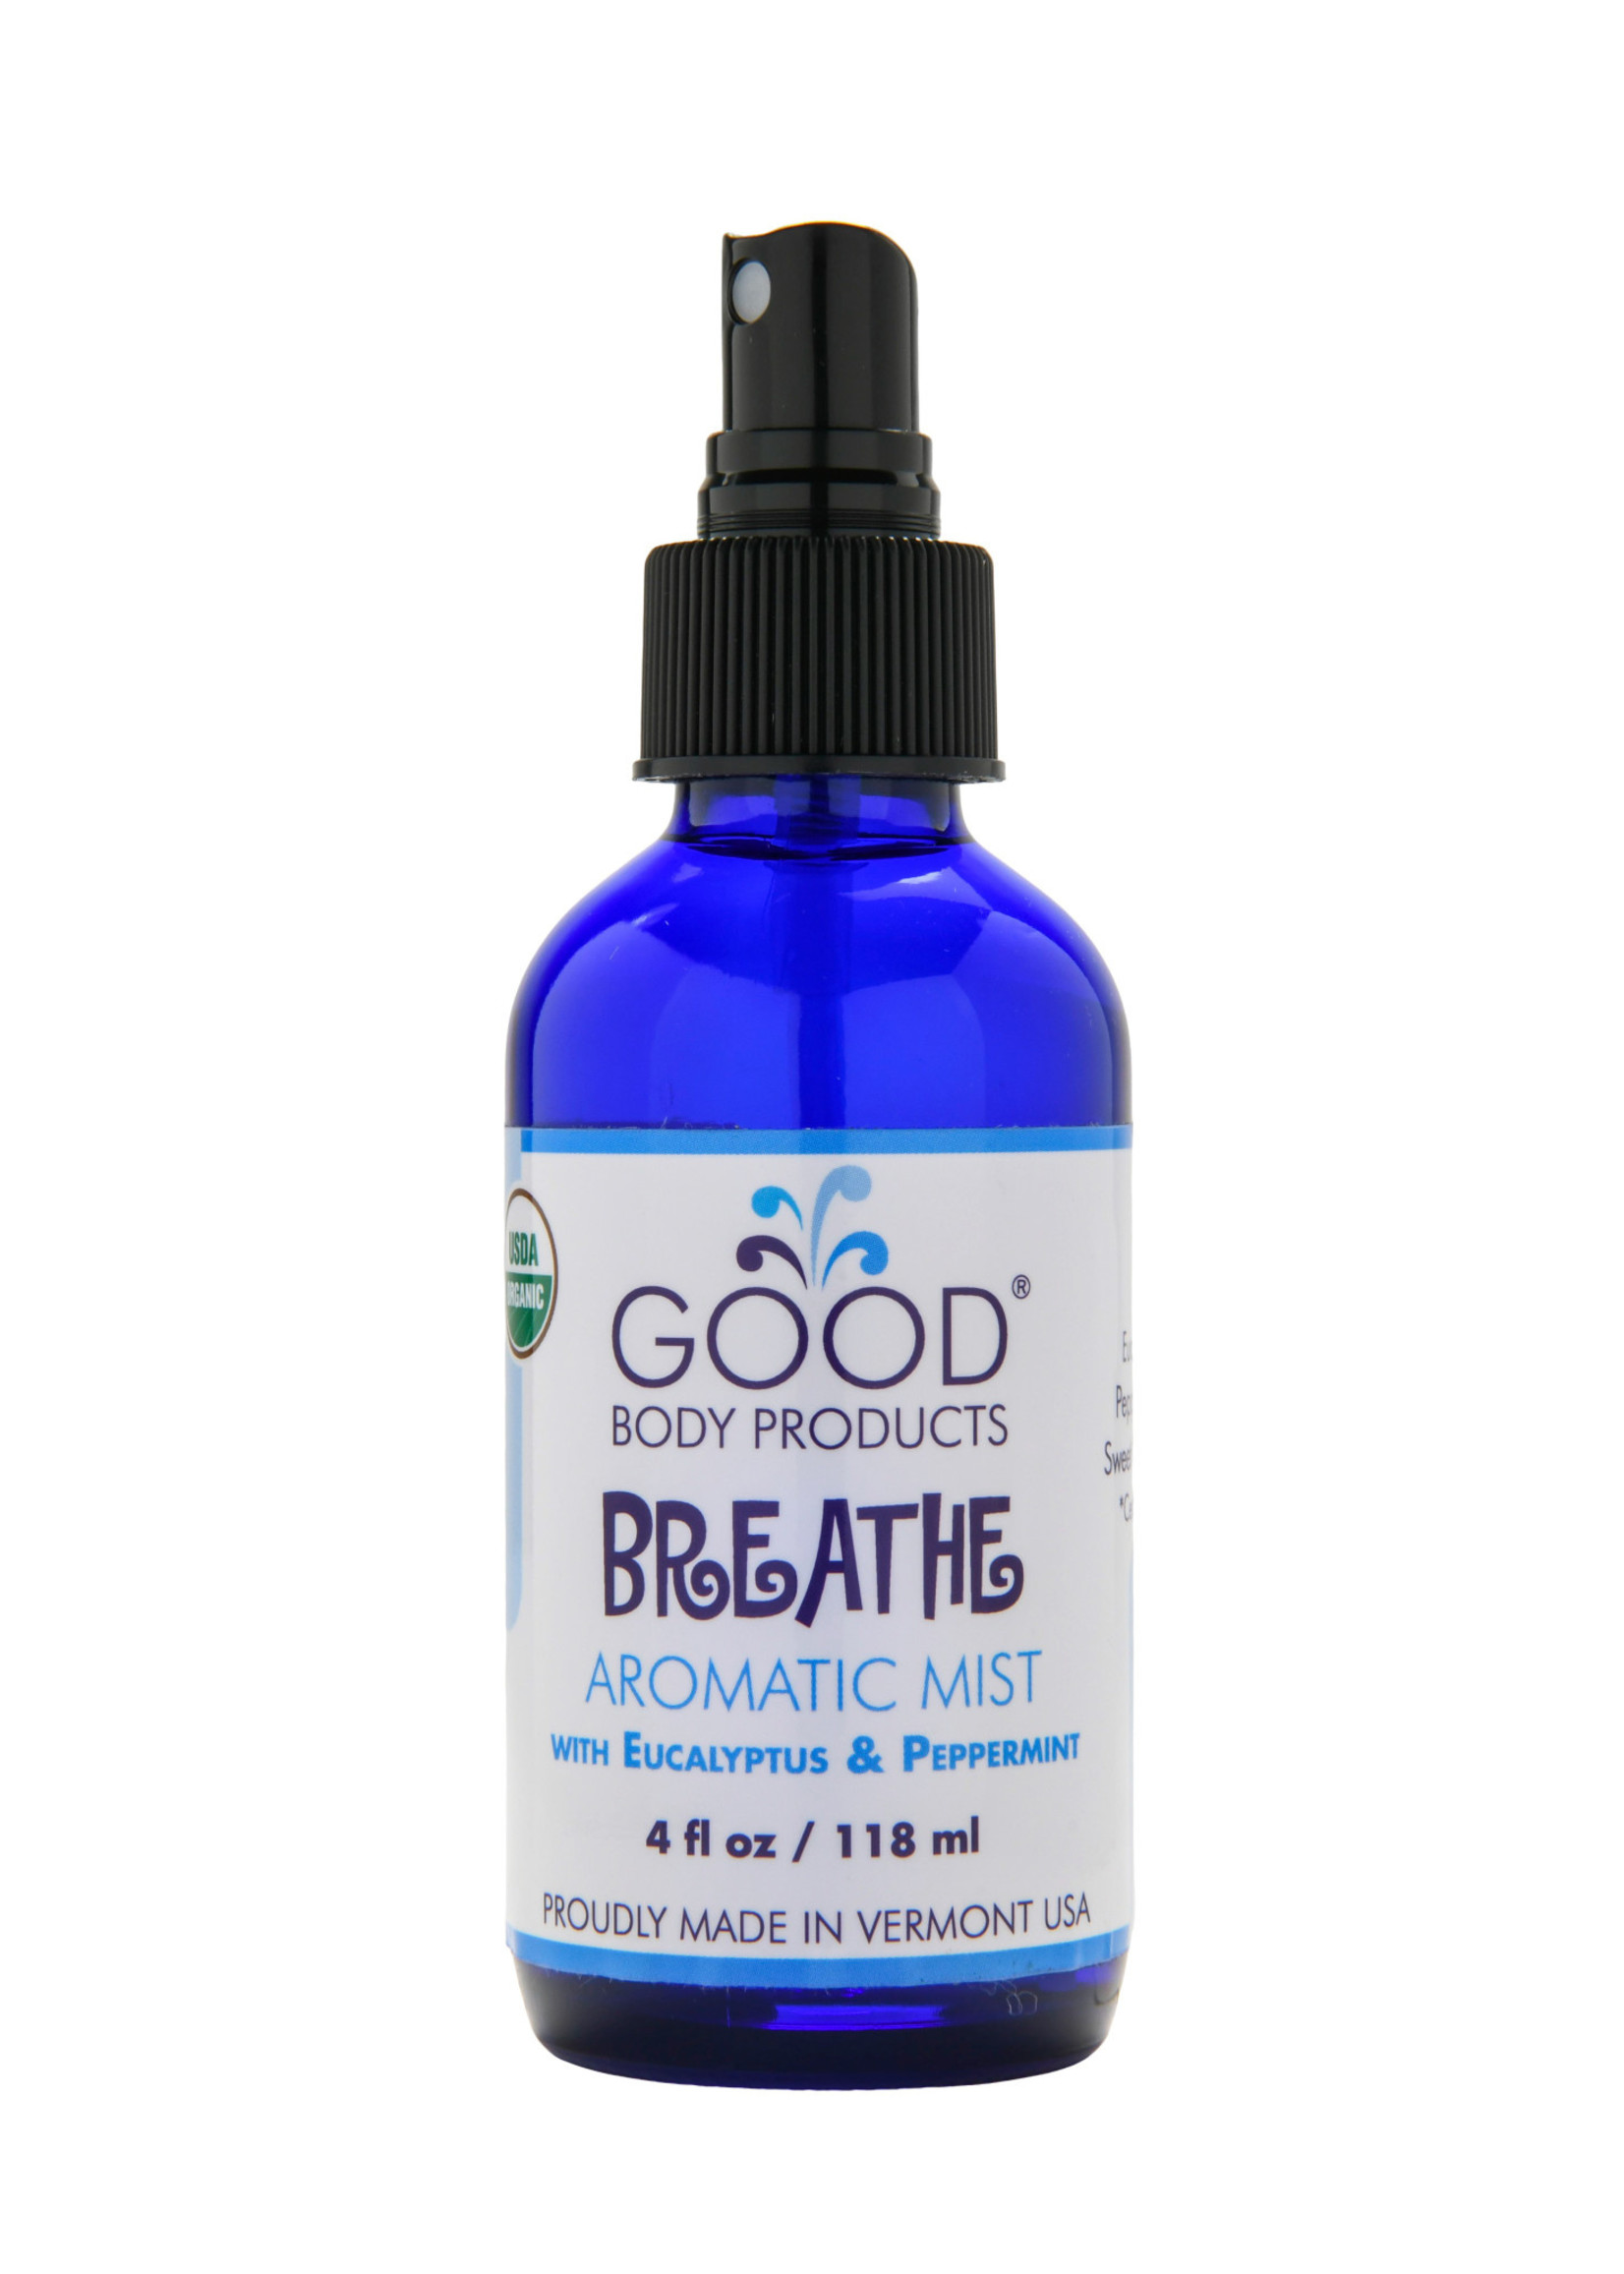 Good Body Products GBP, Breathe Aromatic Mist with Eucalyptus and Peppermint, 4oz